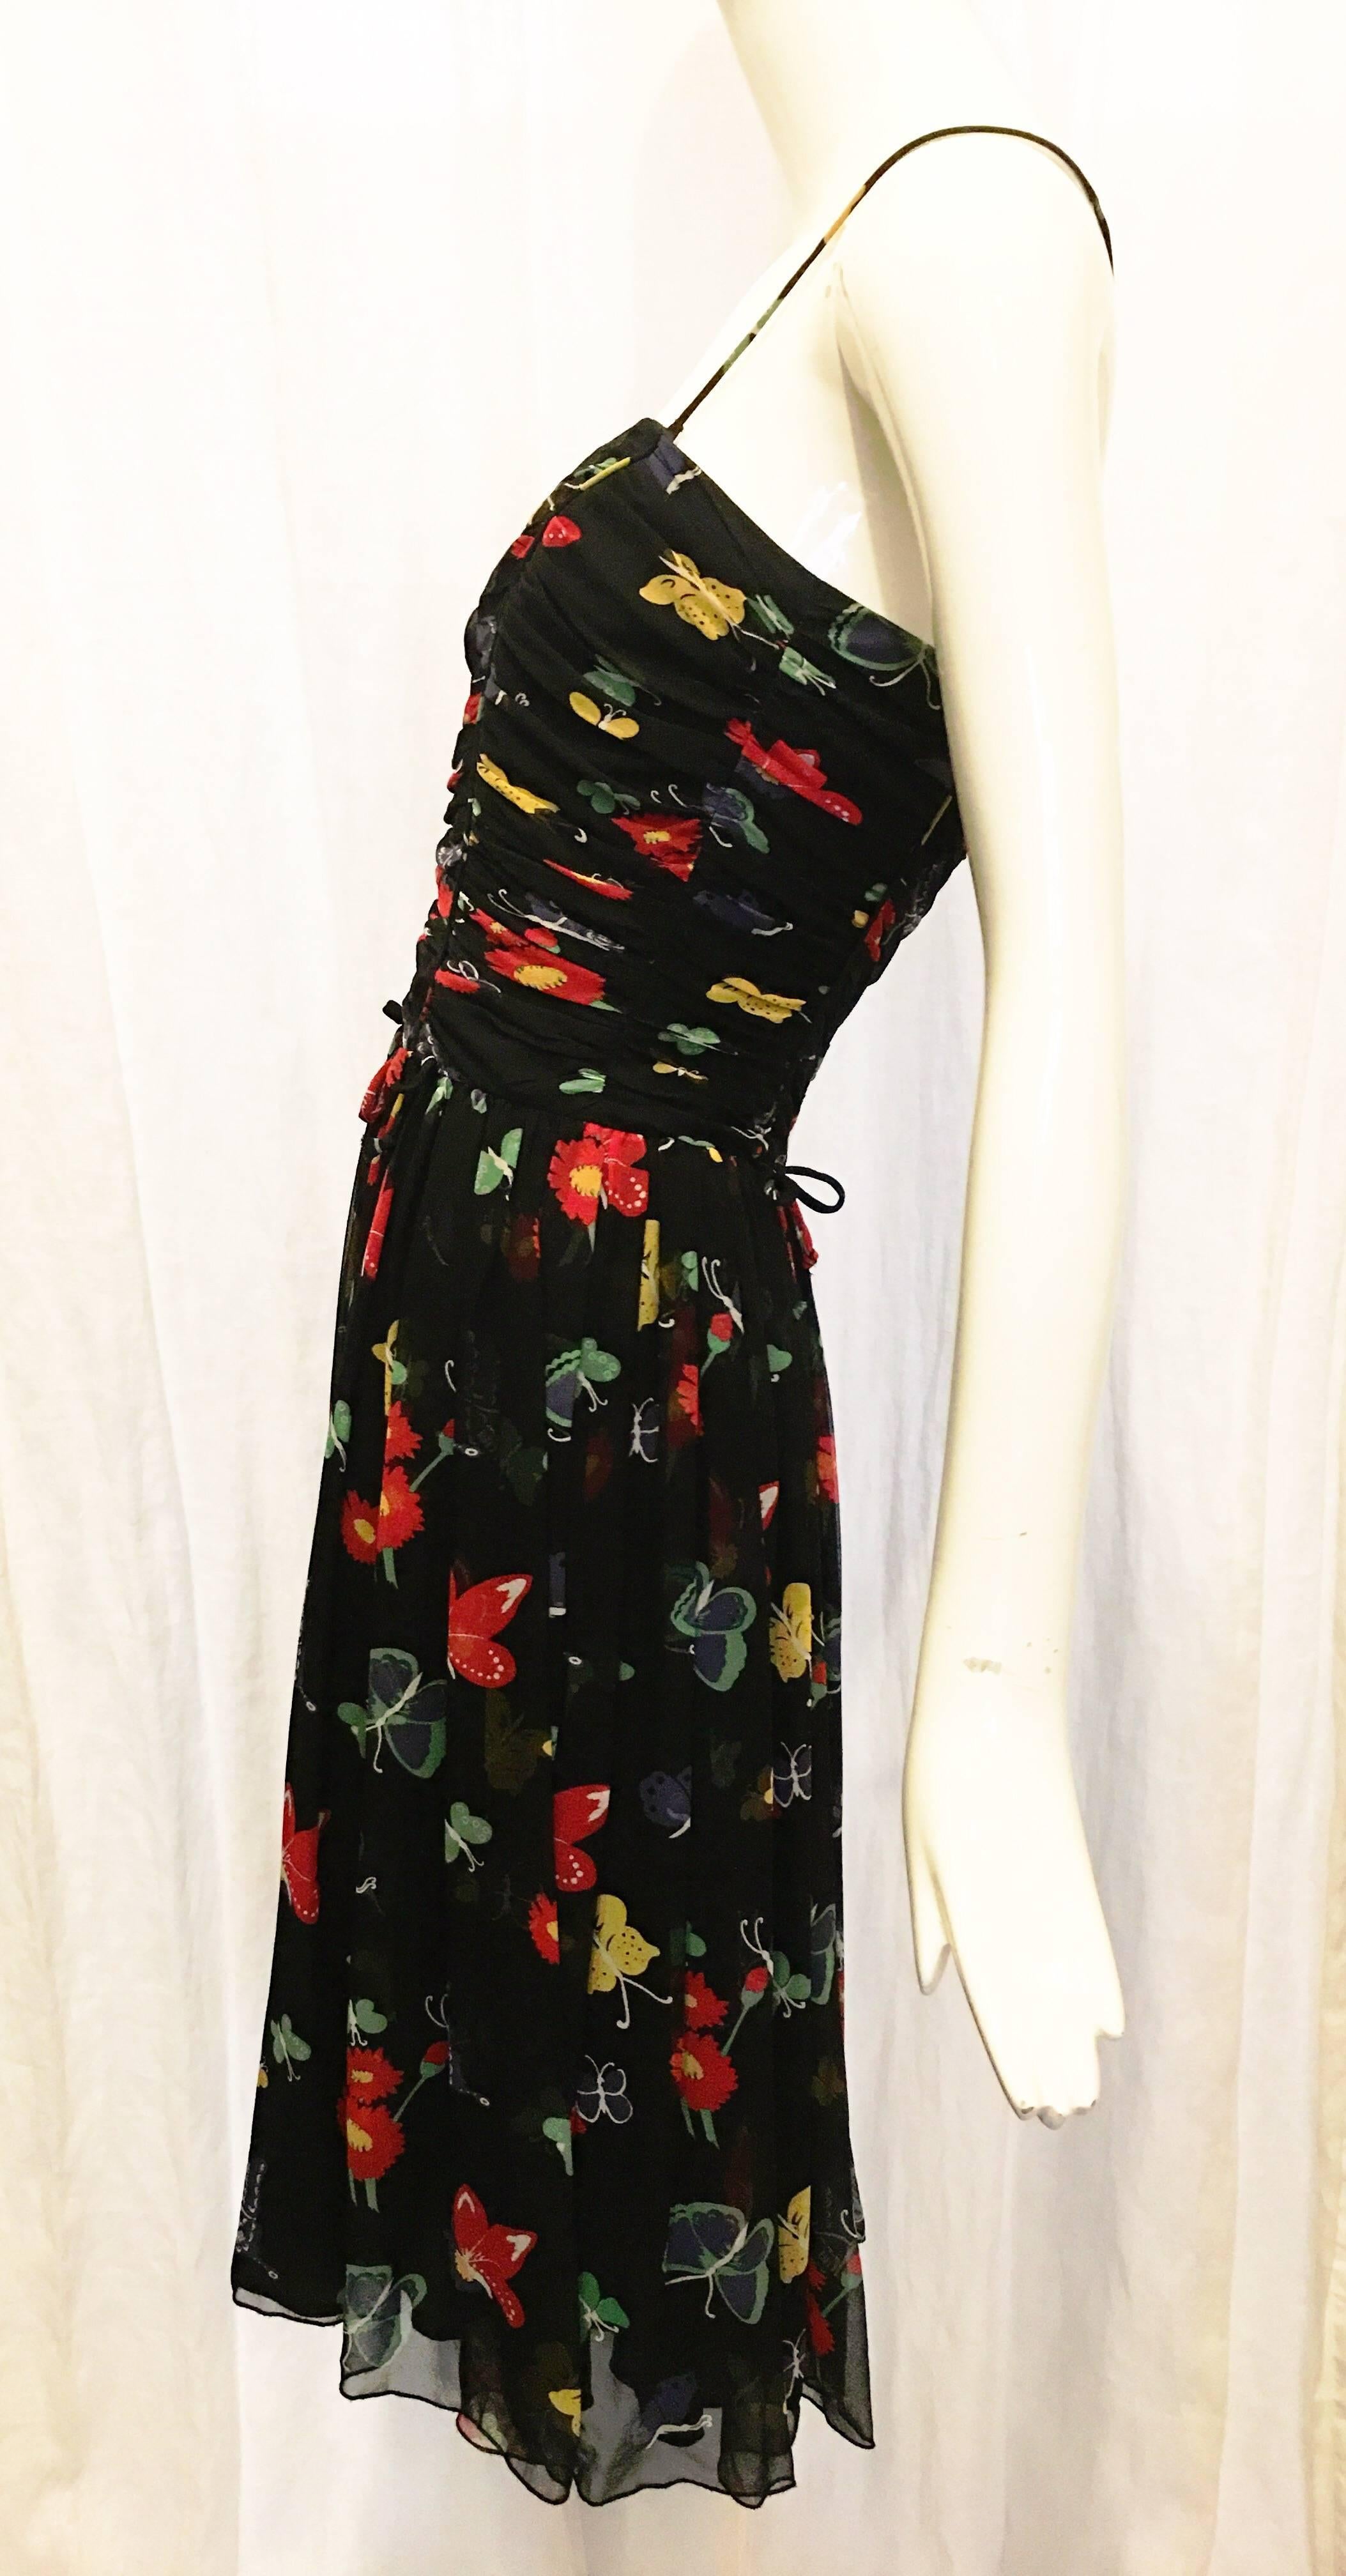 Black ruched bodice dress with allover flower print. Spaghetti straps that attach with buttons for the option of wearing the dress as strapless. Ties at waist at front and back. Zips at back with hook and eye closure. Moves well. A perfect sundress